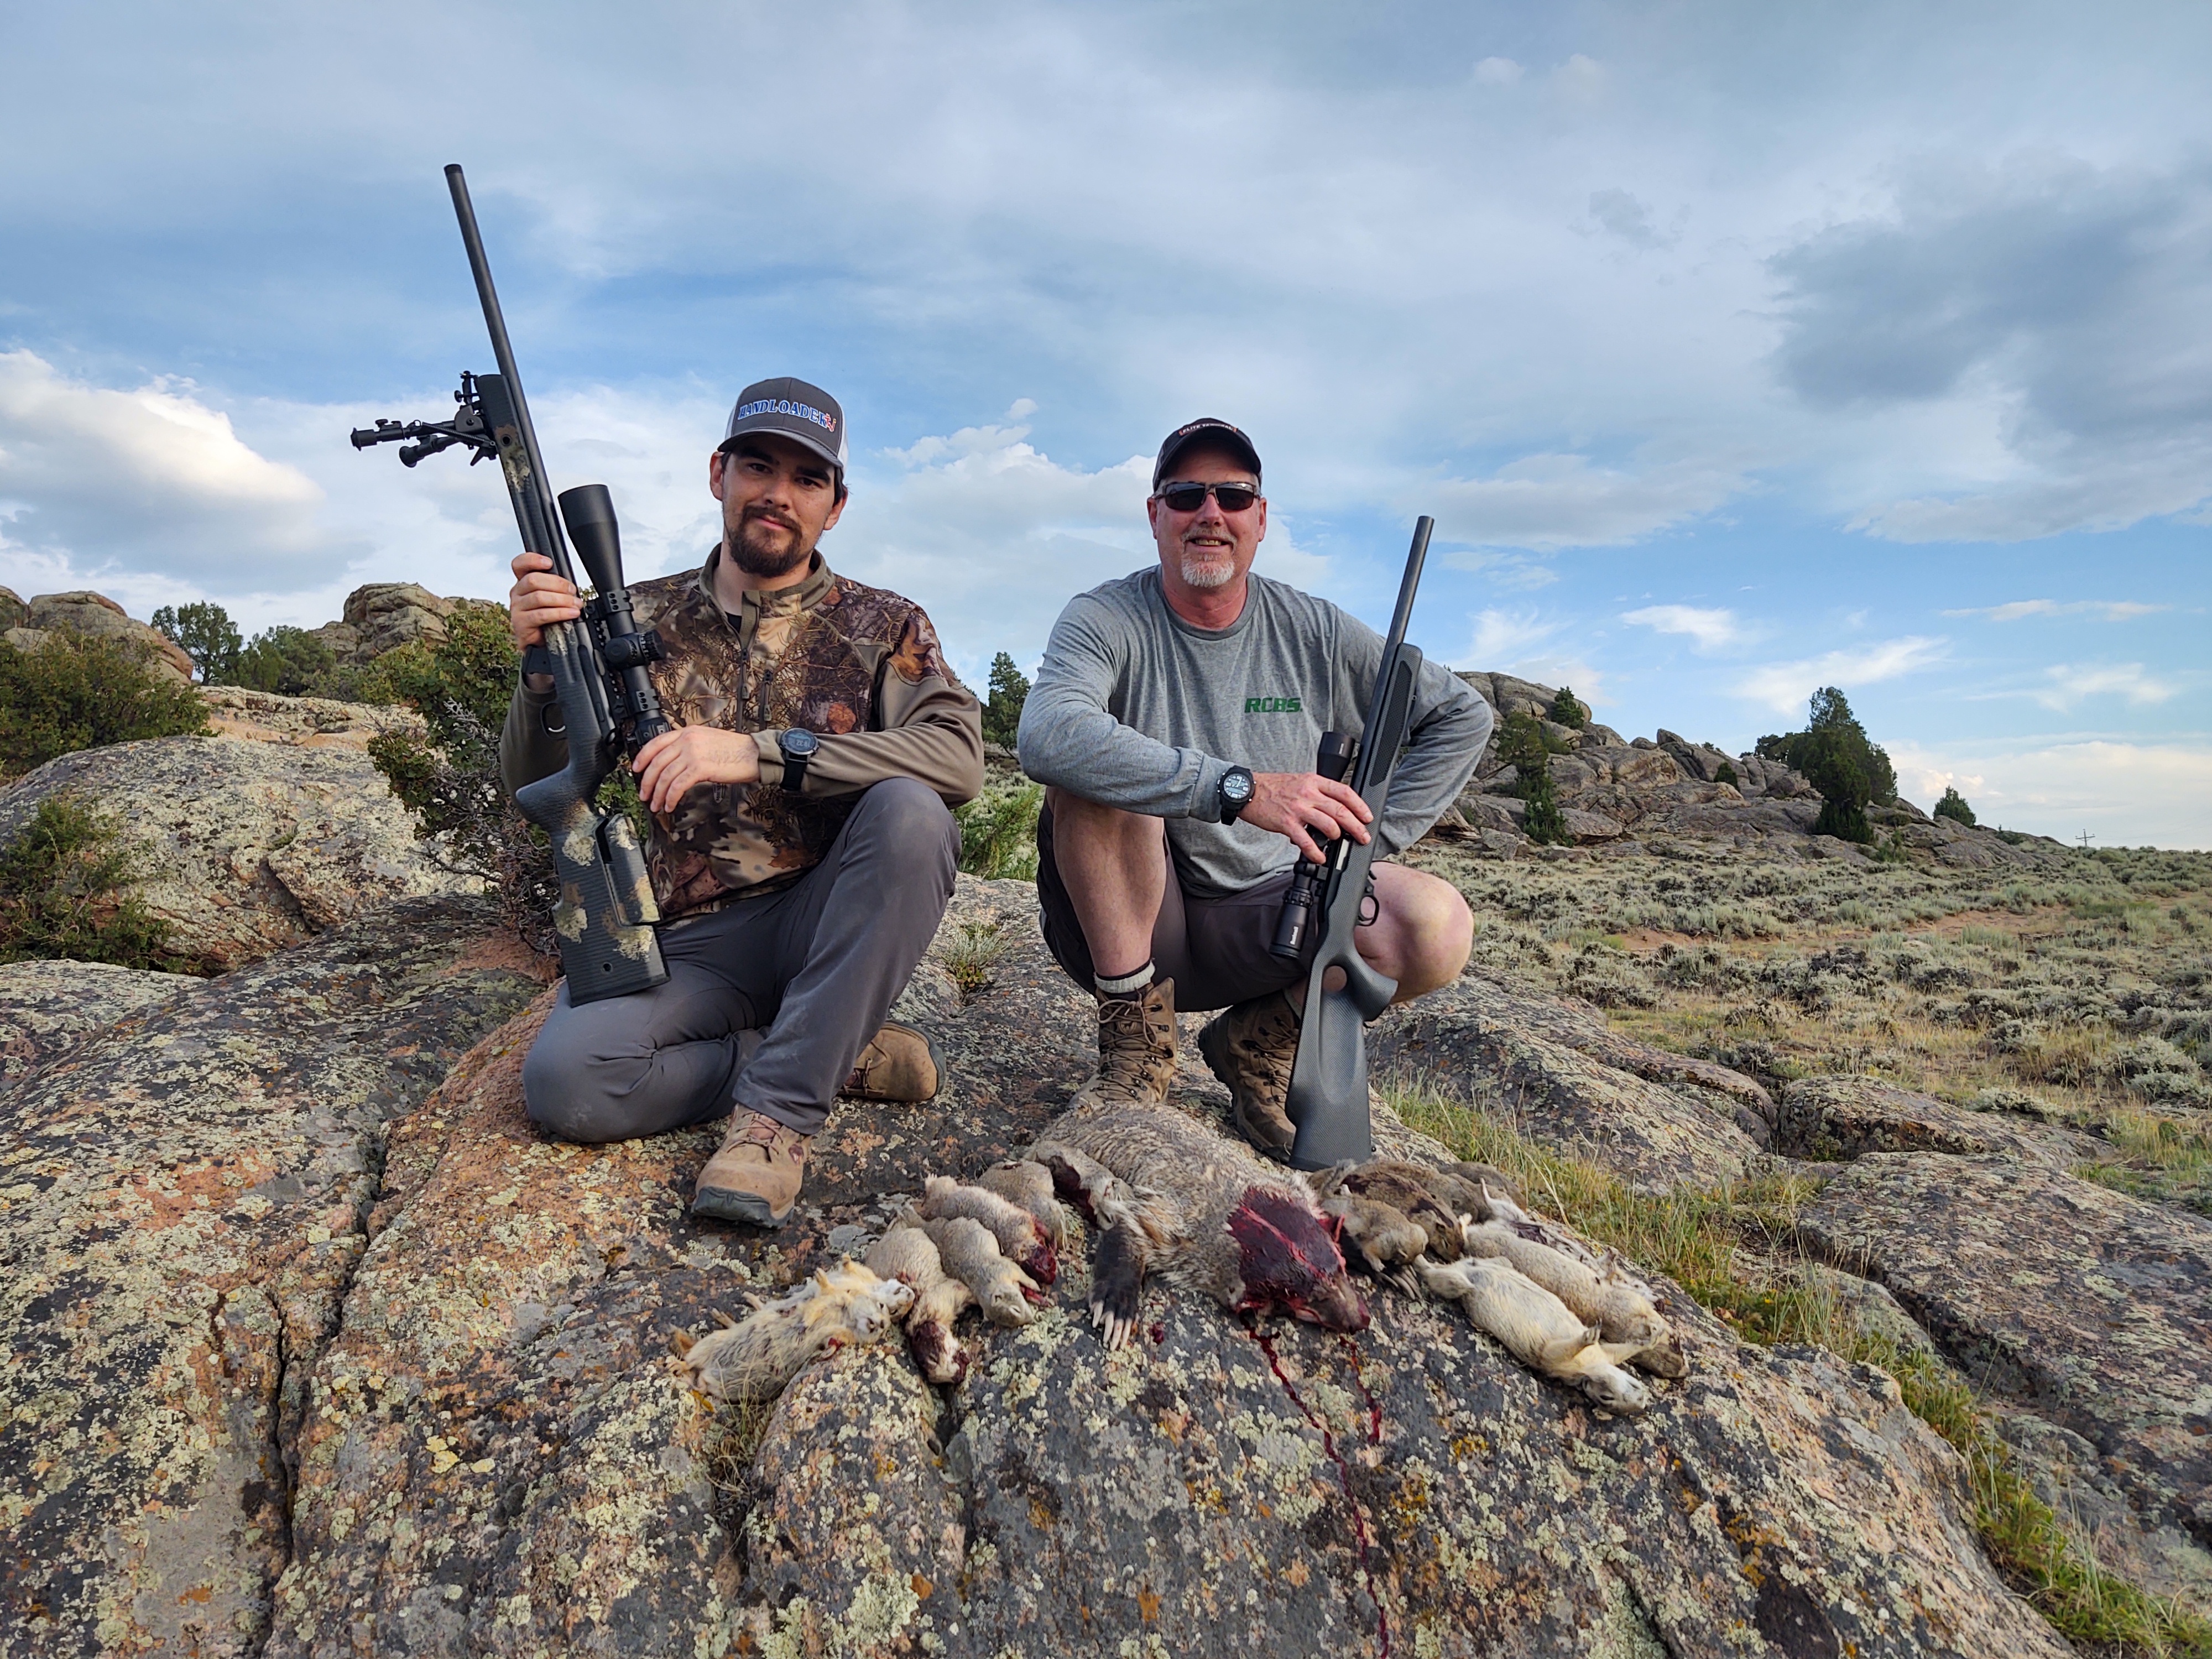 Patrick and I with my prized badger taken with a single shot to the head with a .17 HMR, For the Prairie dogs the CZ 457 rifle I am holding was used throughout.